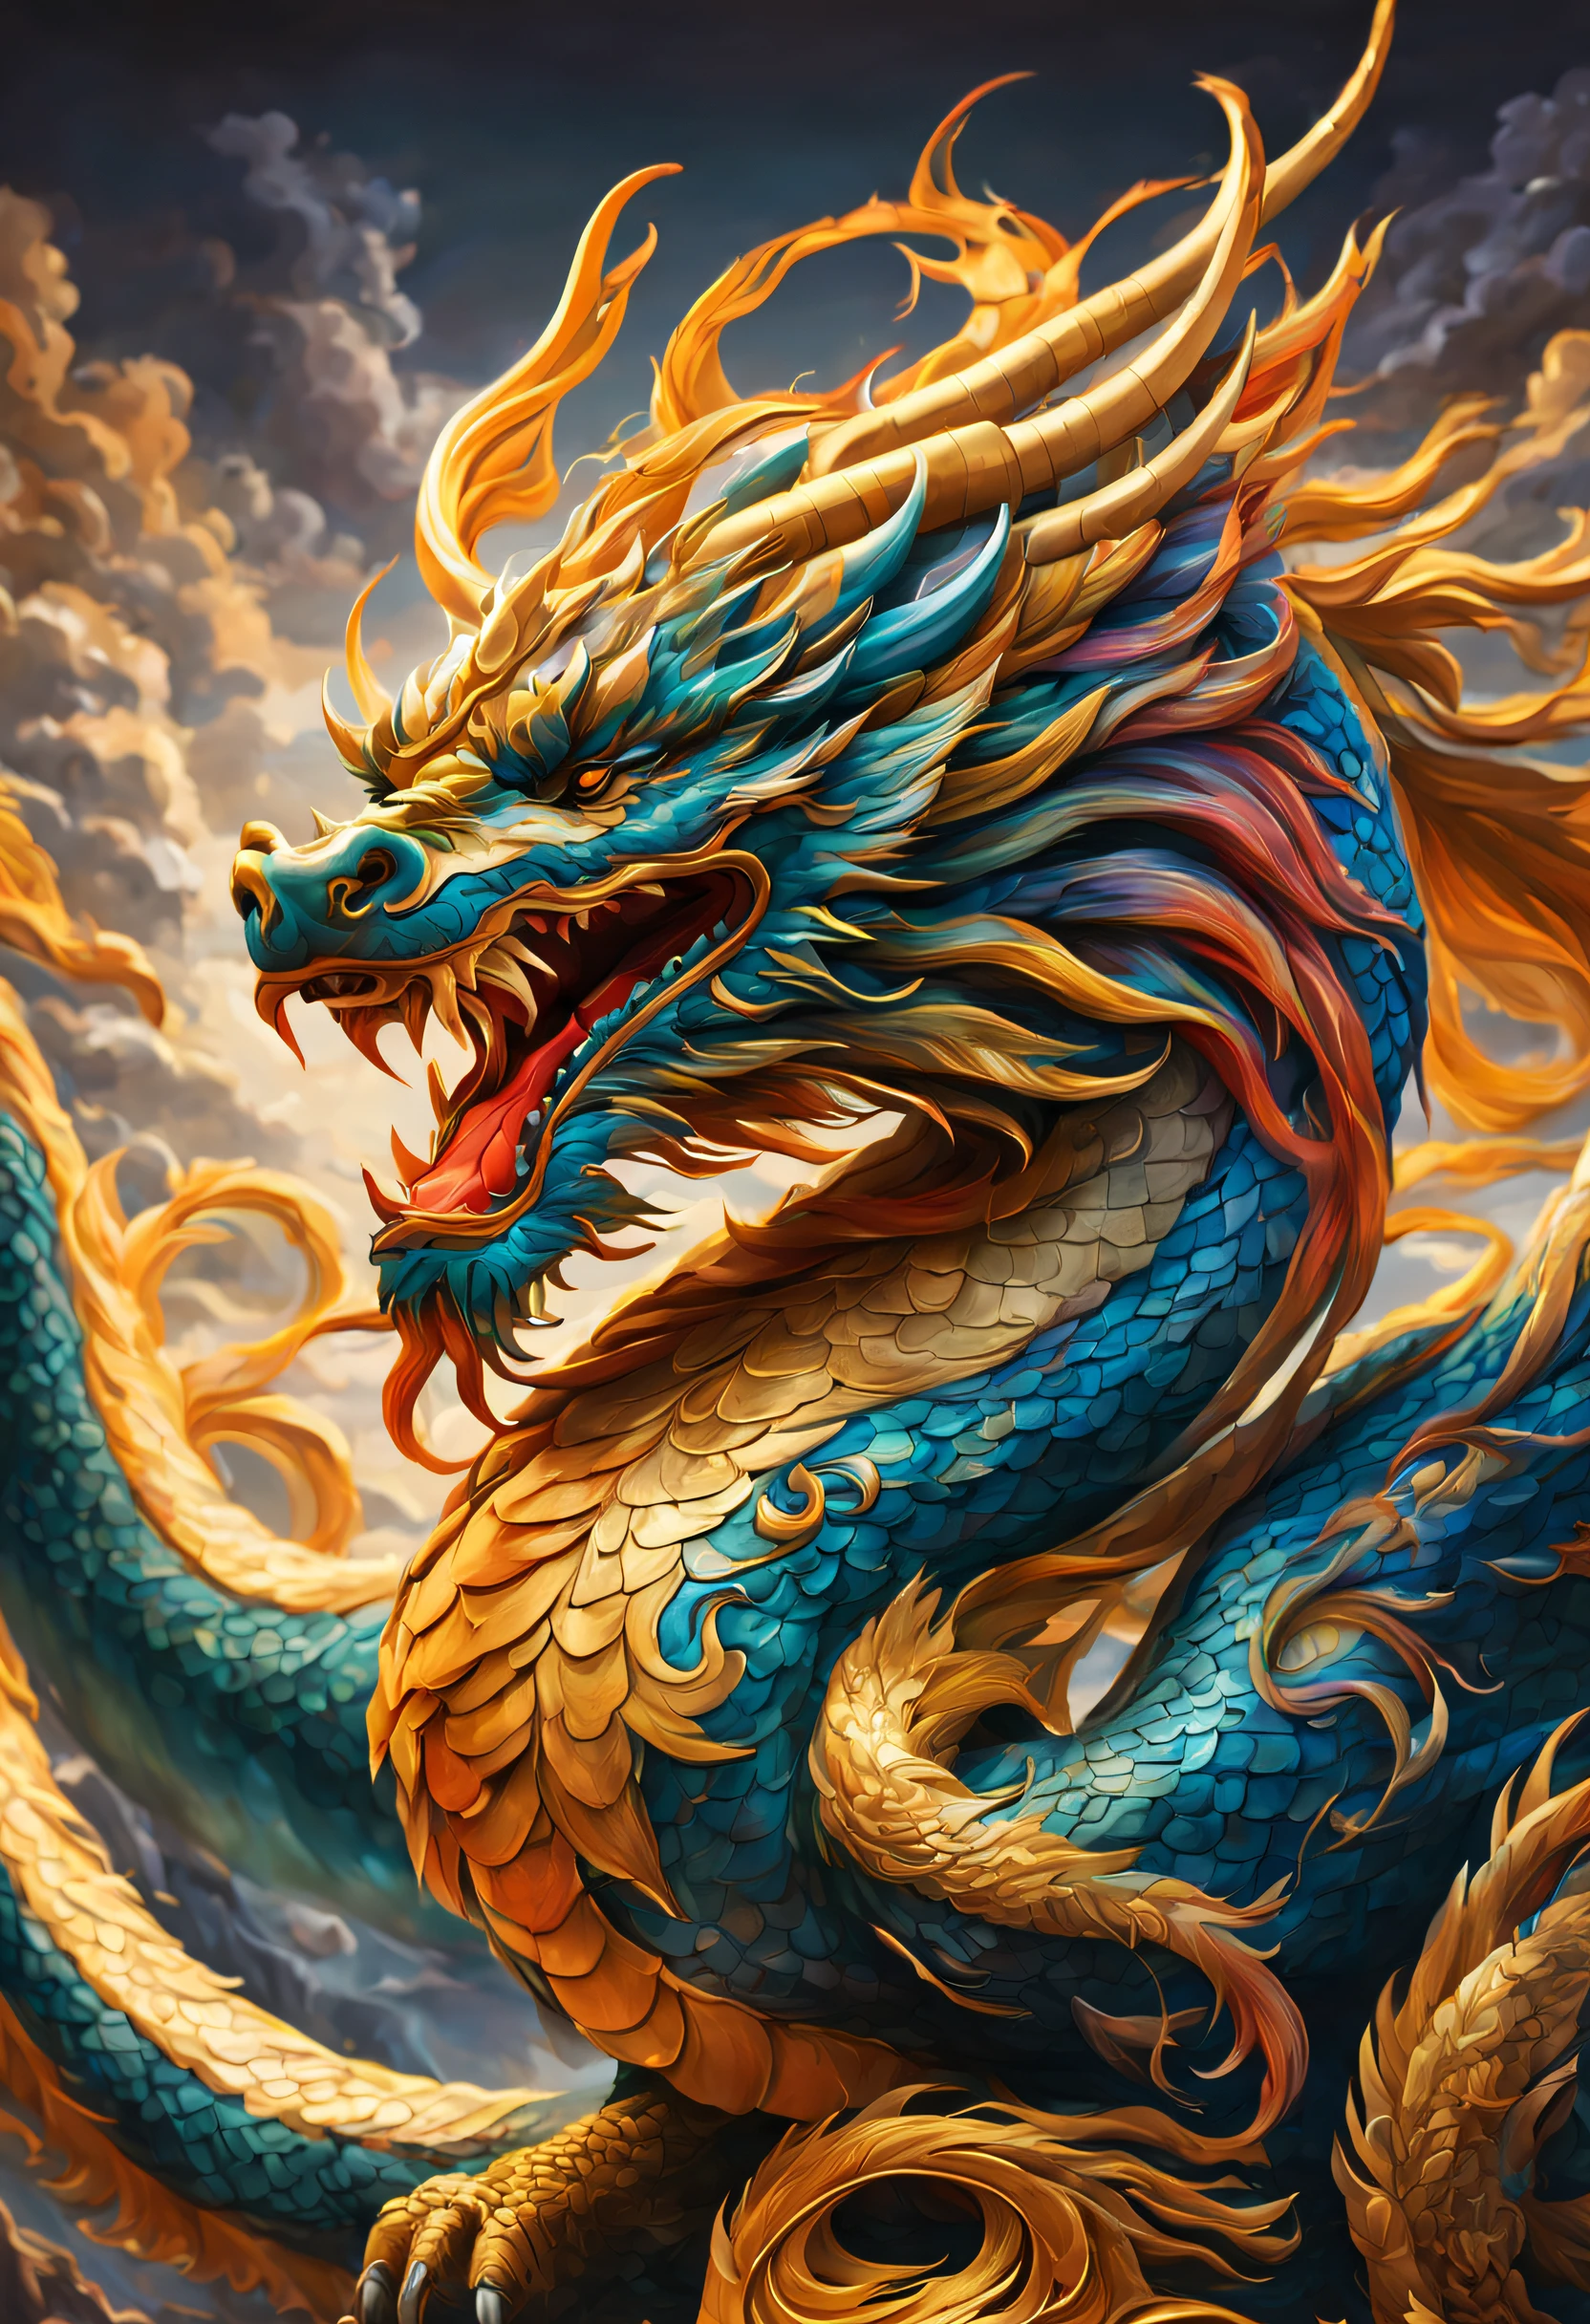 Dragon Poses: Over 2,180 Royalty-Free Licensable Stock Vectors & Vector Art  | Shutterstock